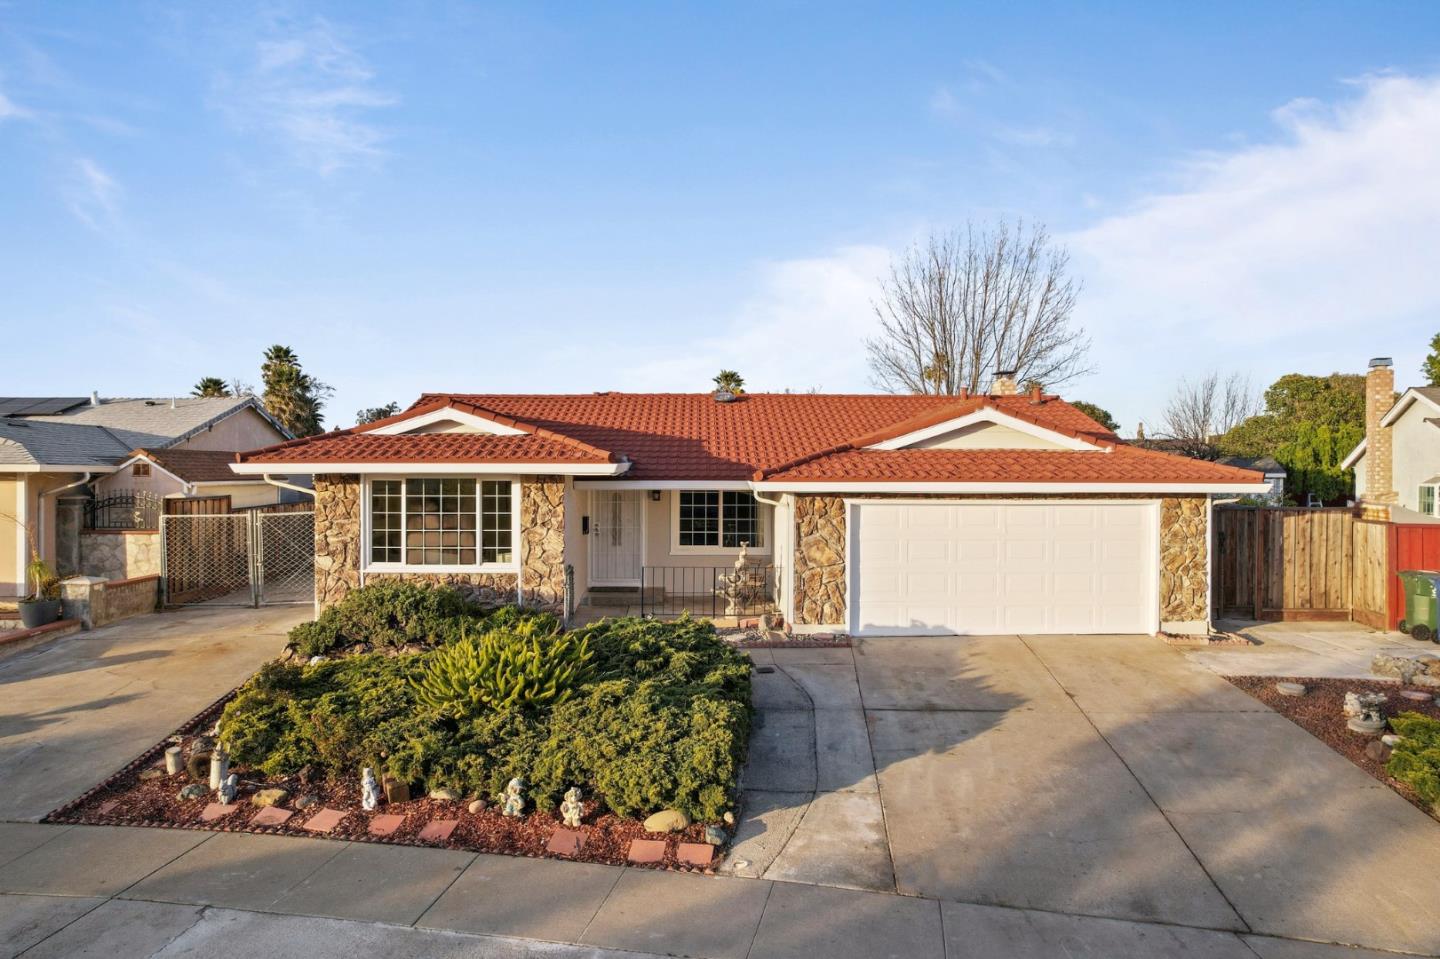 Photo of 6259 Narcissus Ave in Newark, CA